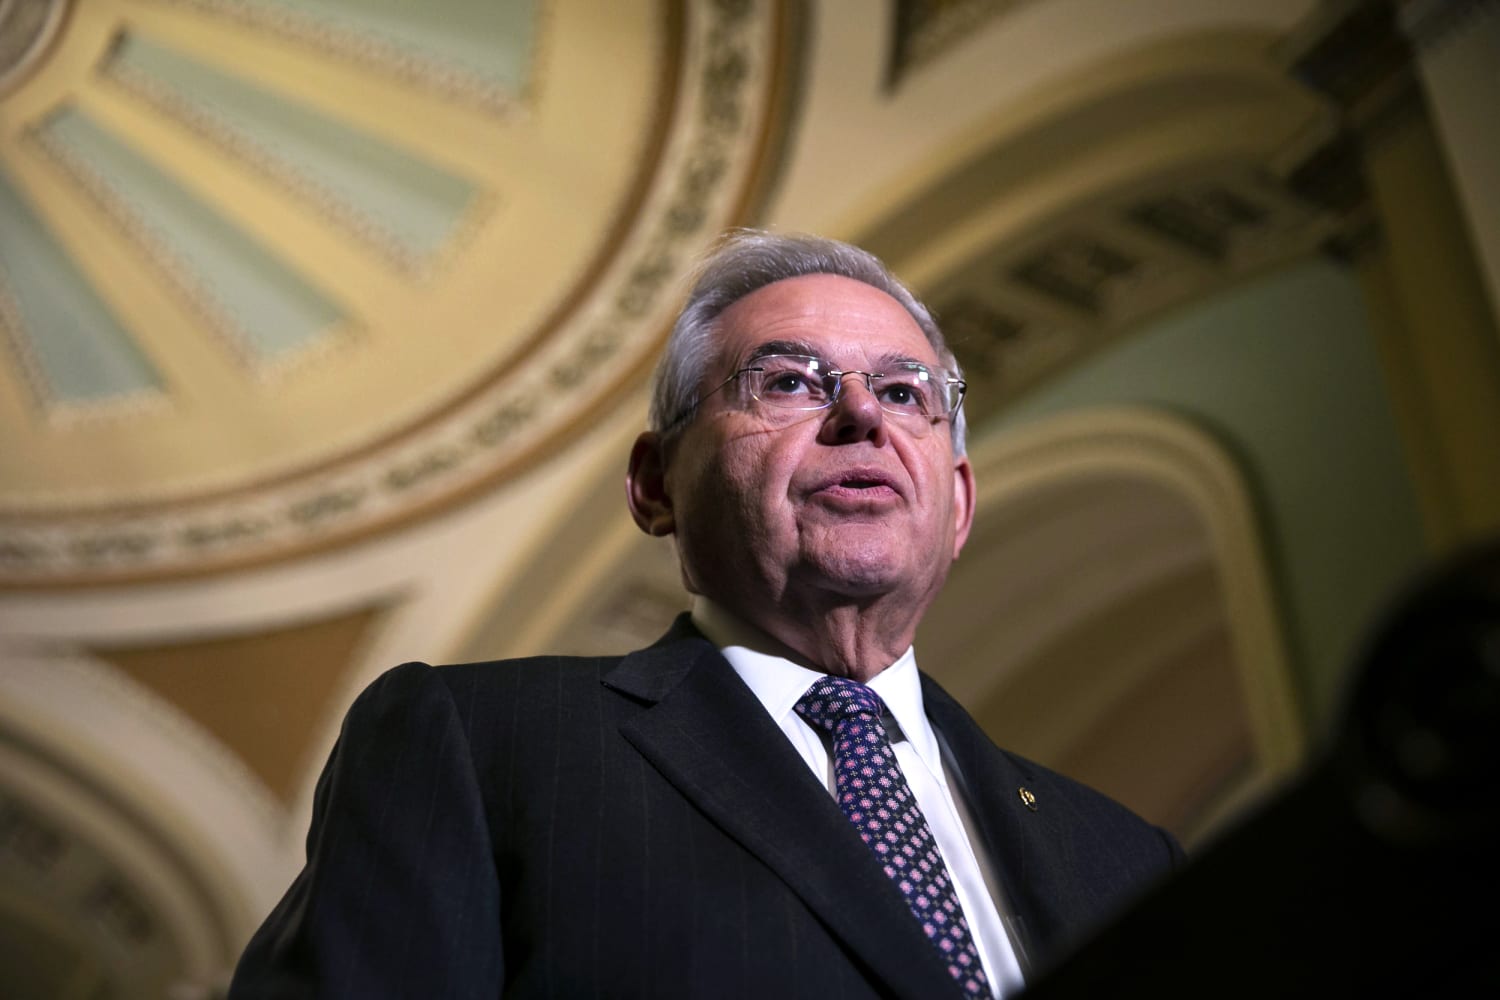 Sen. Bob Menendez indicates he will not resign after indictment on bribery charges